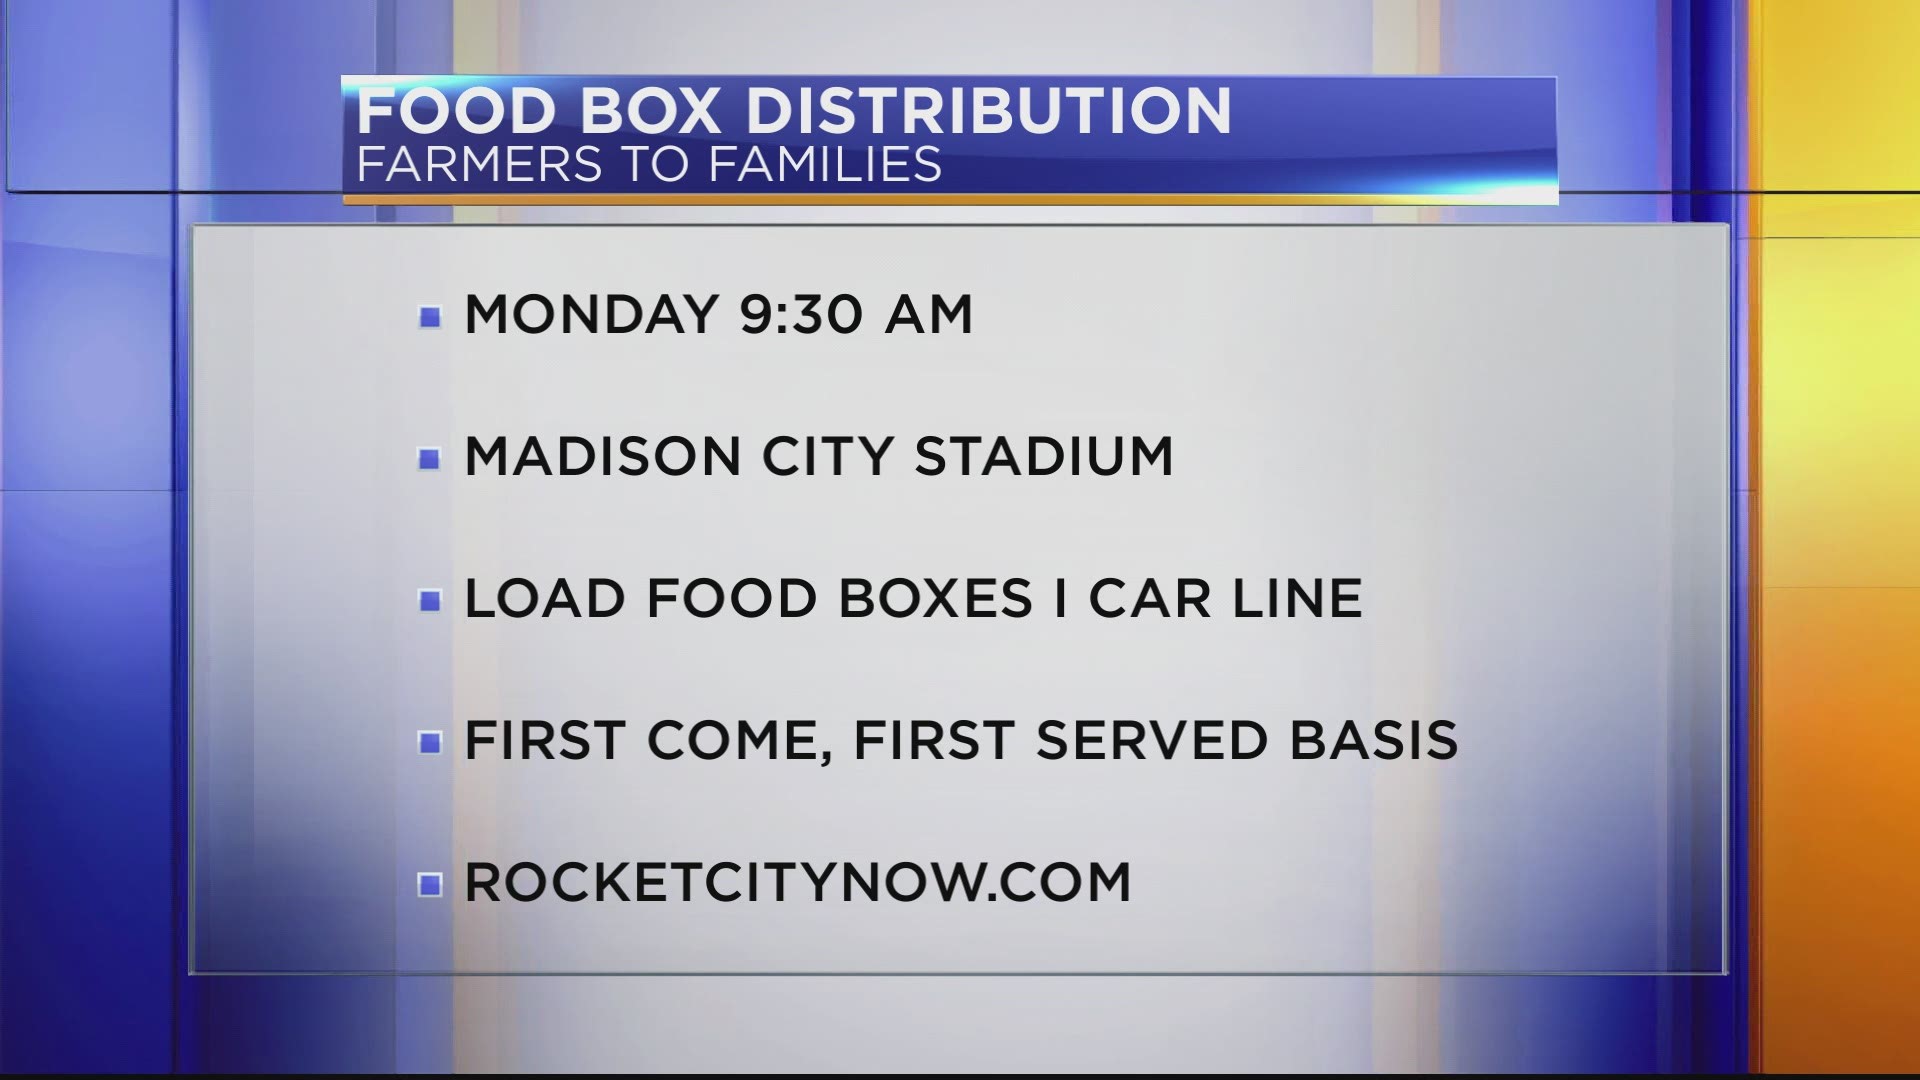 The next distribution is Monday, March 8, at Madison City Stadium, starting at 9:30 a.m.